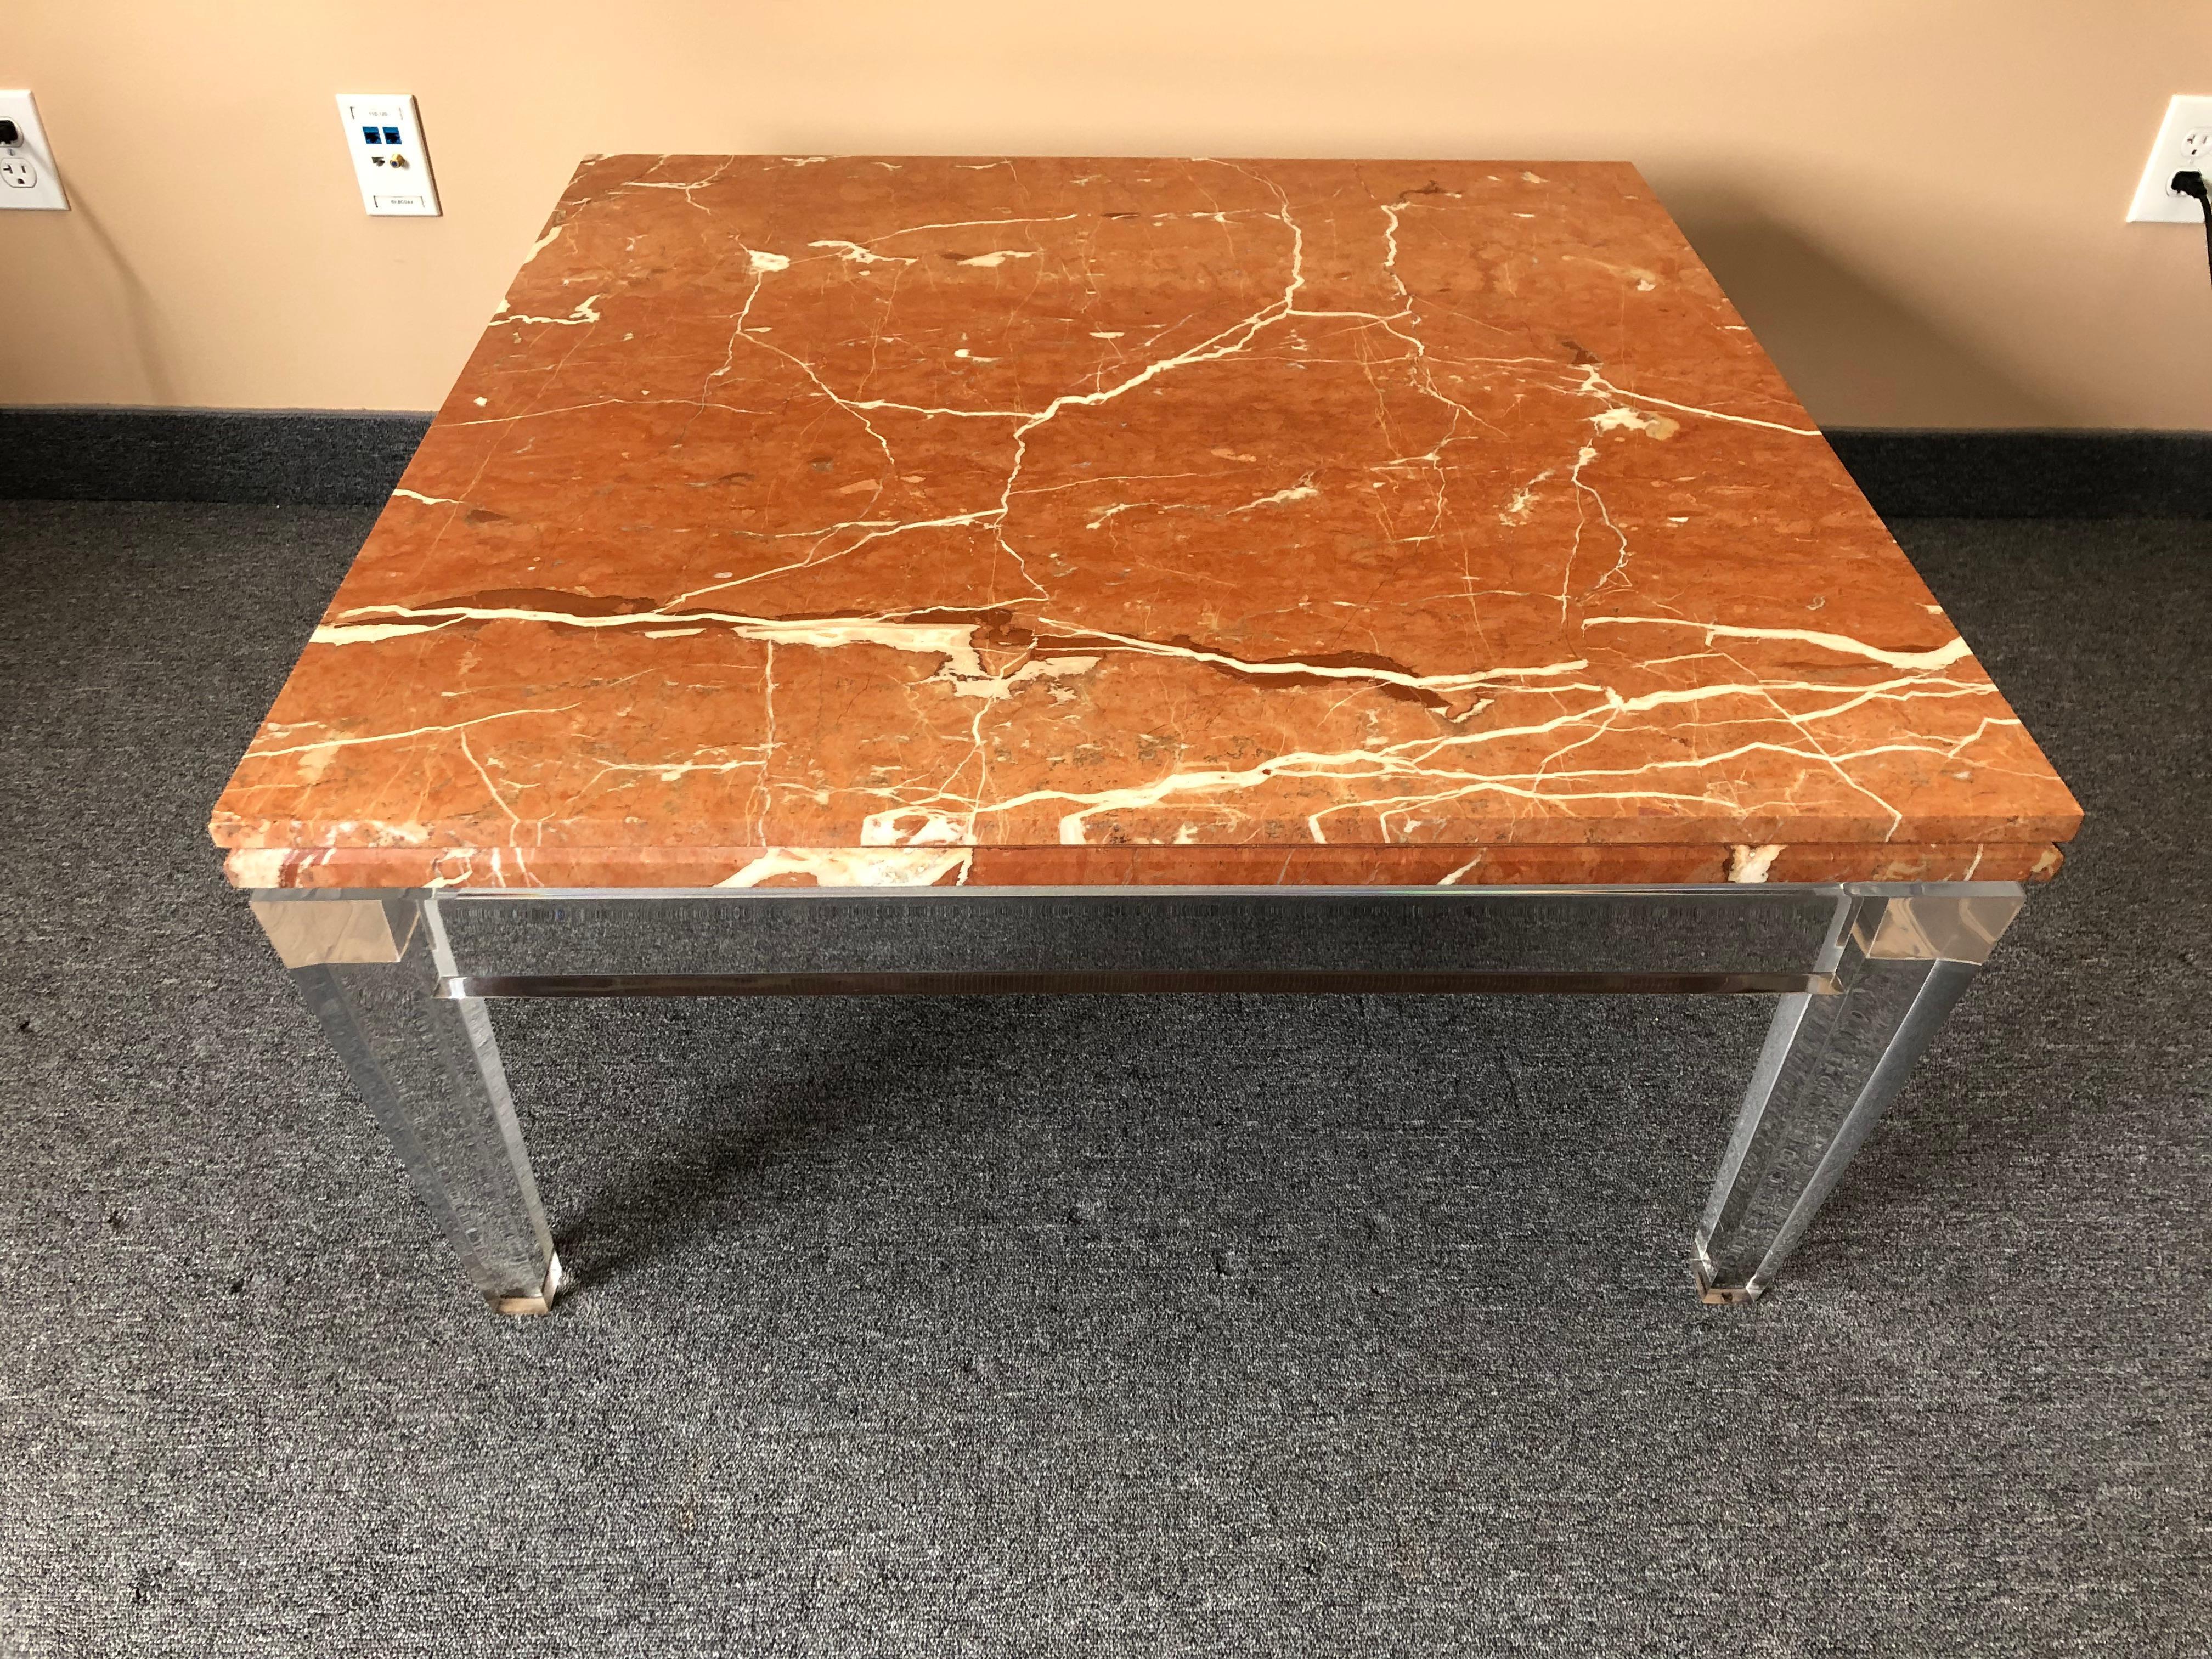 A rare gorgeous Mid-Century Modern coffee table that pairs a clear Lucite base that seems to float underneath a heavy slab of terracotta and cream marble top. One of a kind elegant and glamorous focal point.